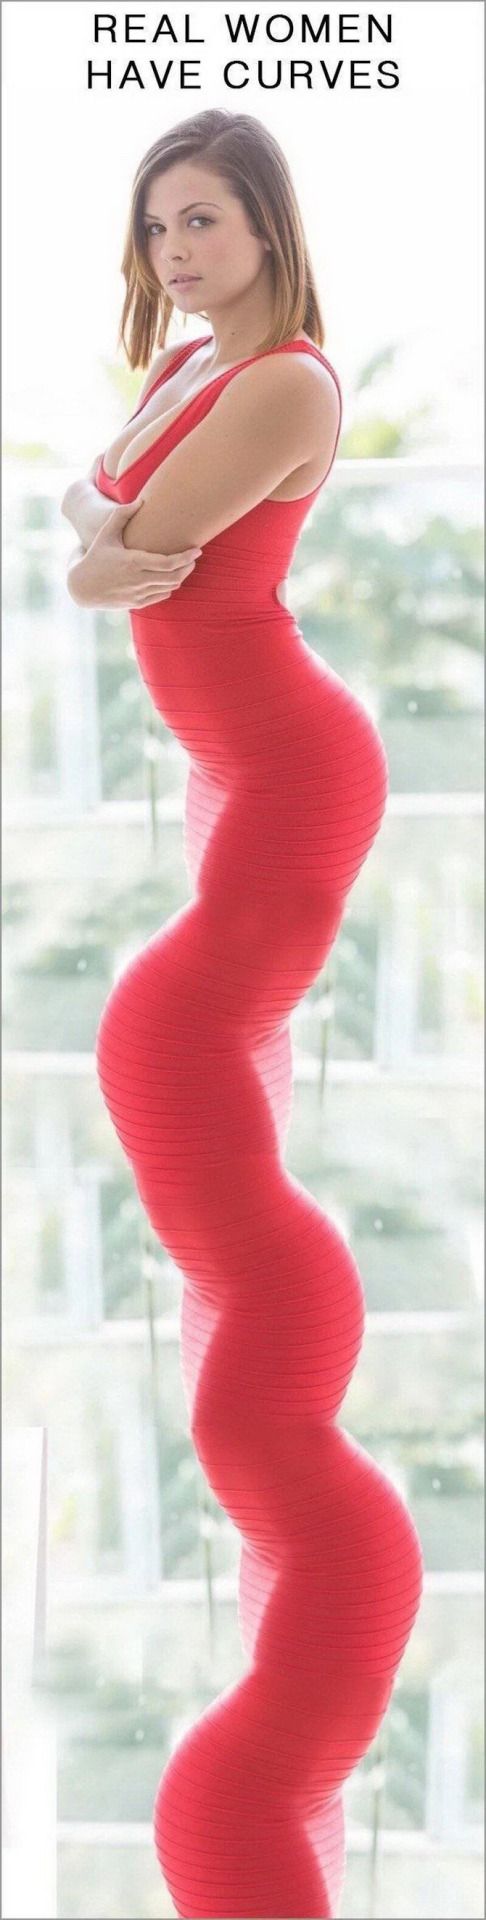 real woman have curves.jpg